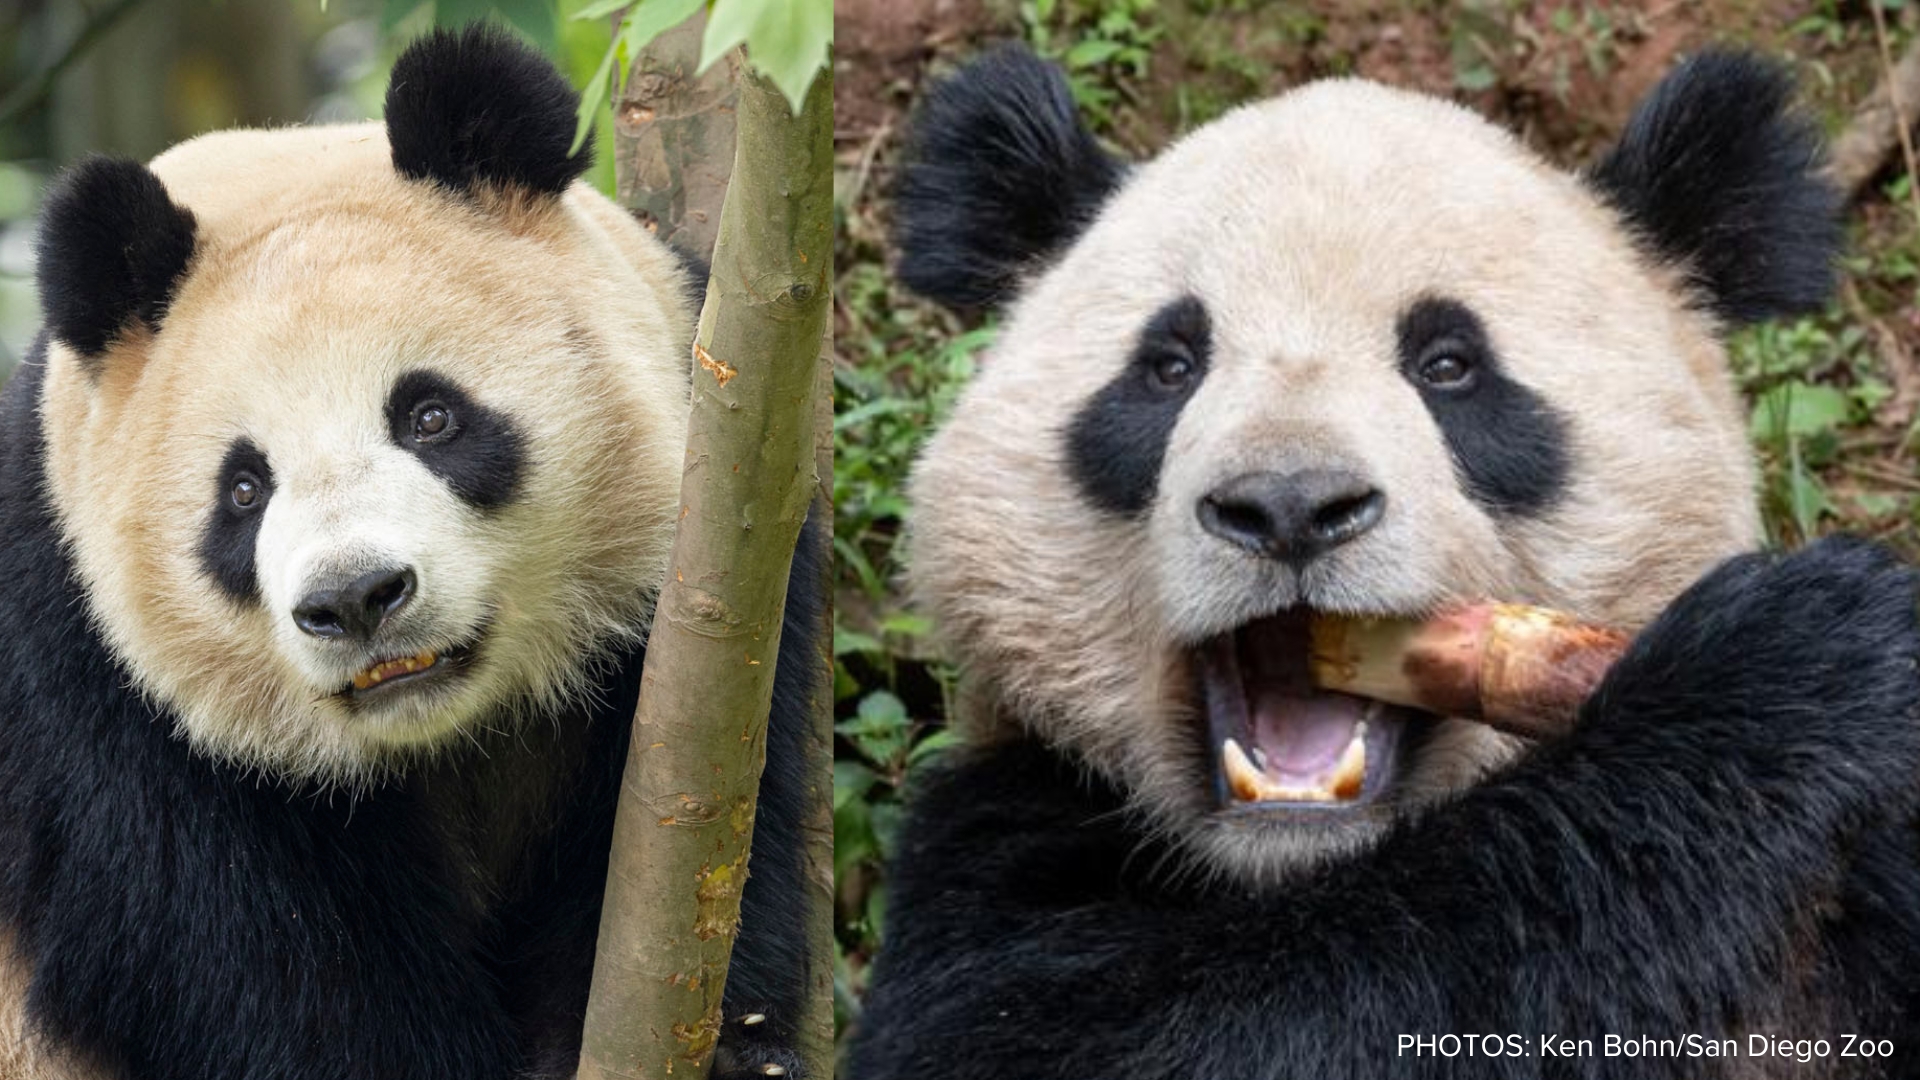 The pandas are expected to arrive in San Diego sometime this summer. The zoo has not hosted pandas since 2019.